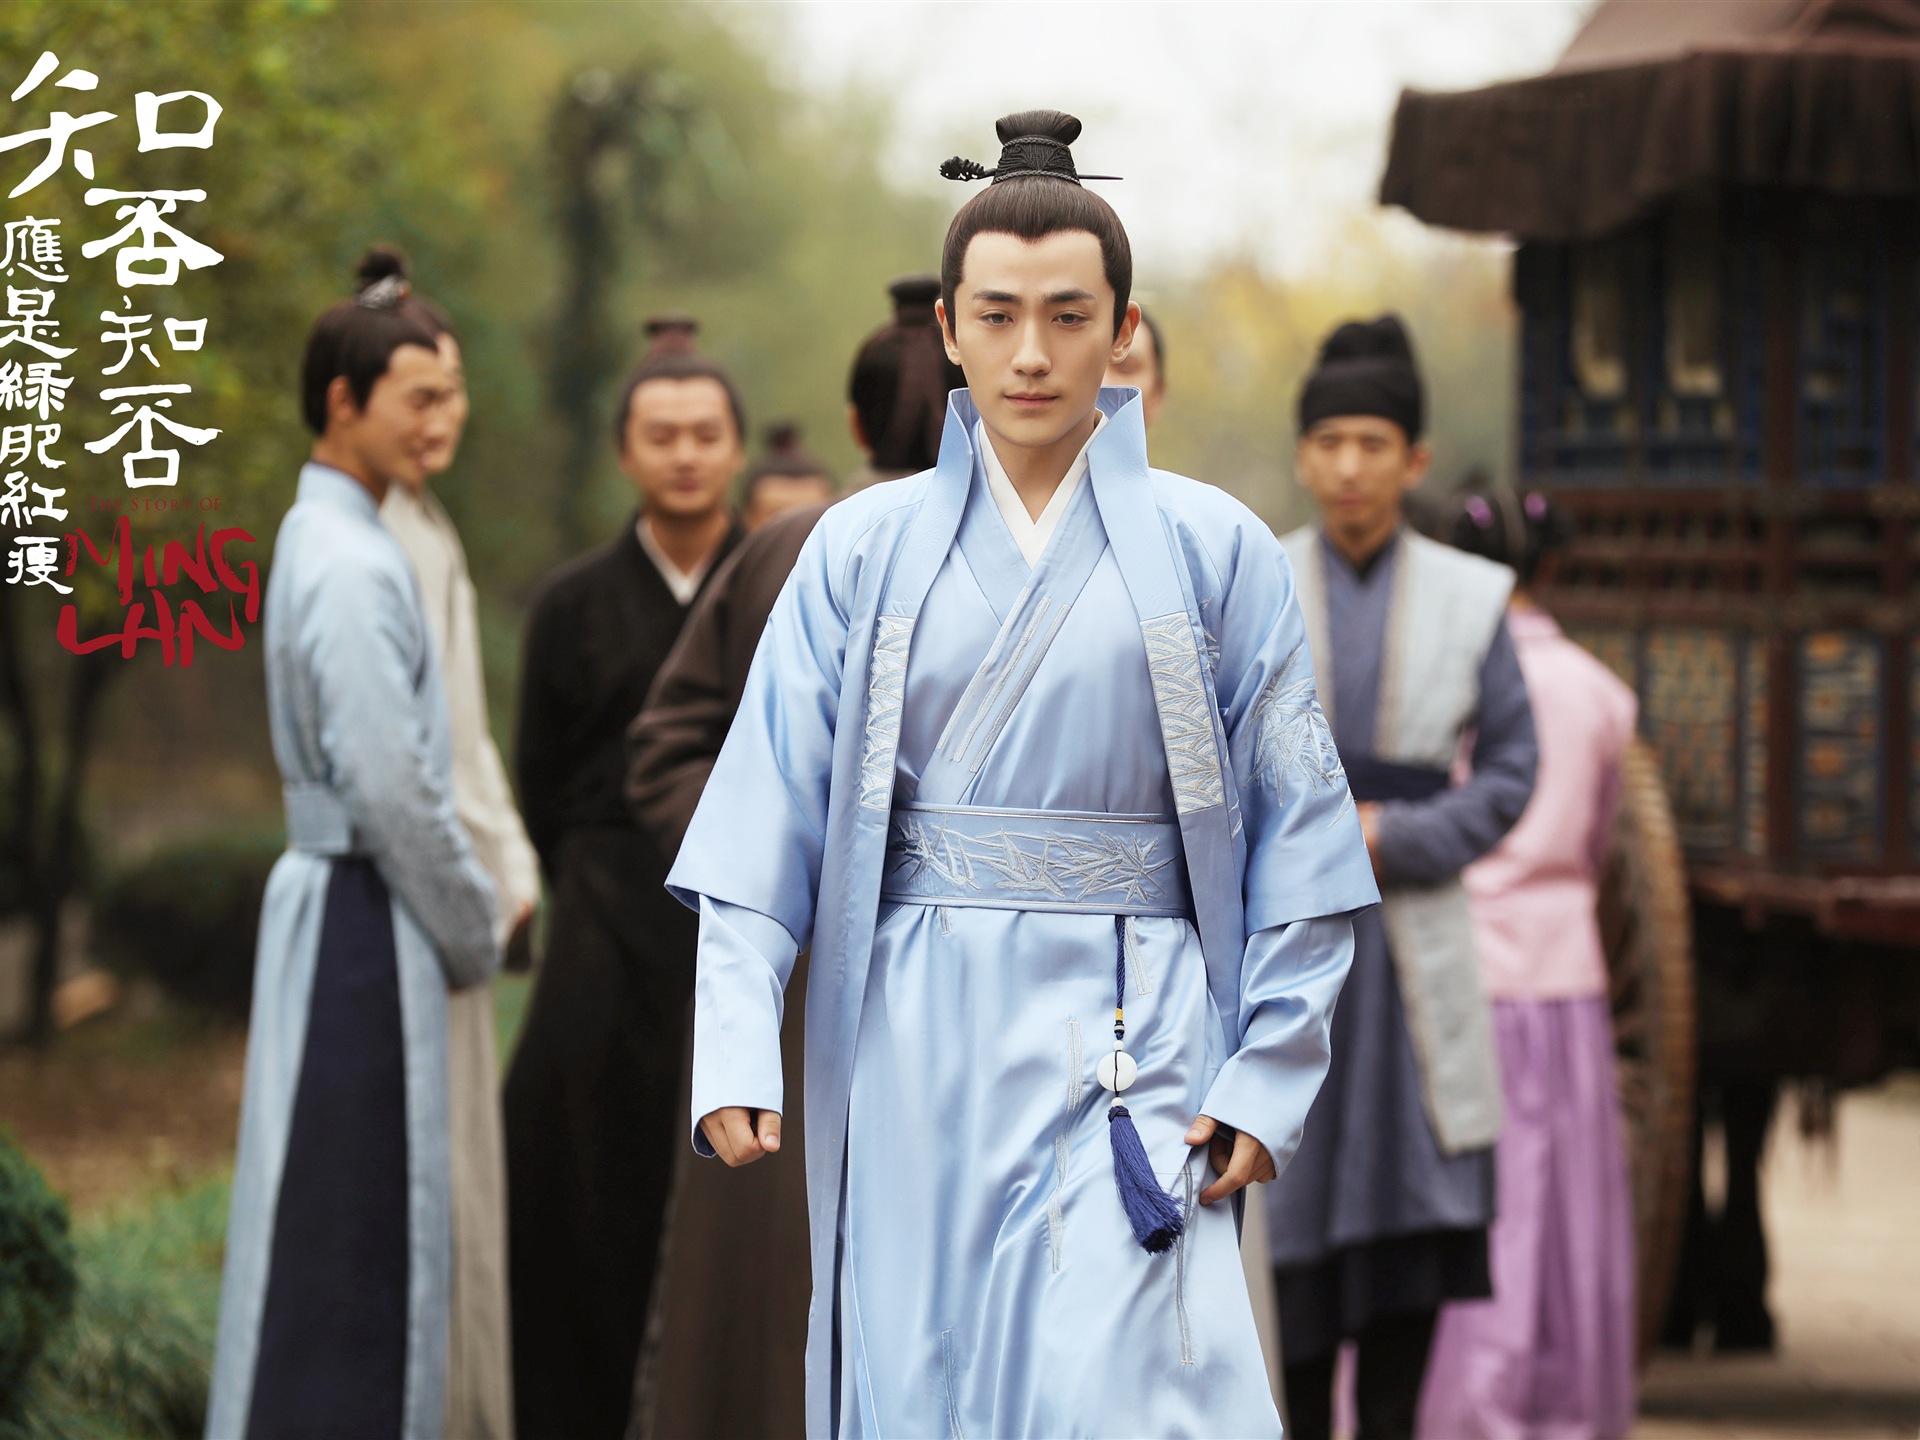 The Story Of MingLan, TV series HD wallpapers #54 - 1920x1440